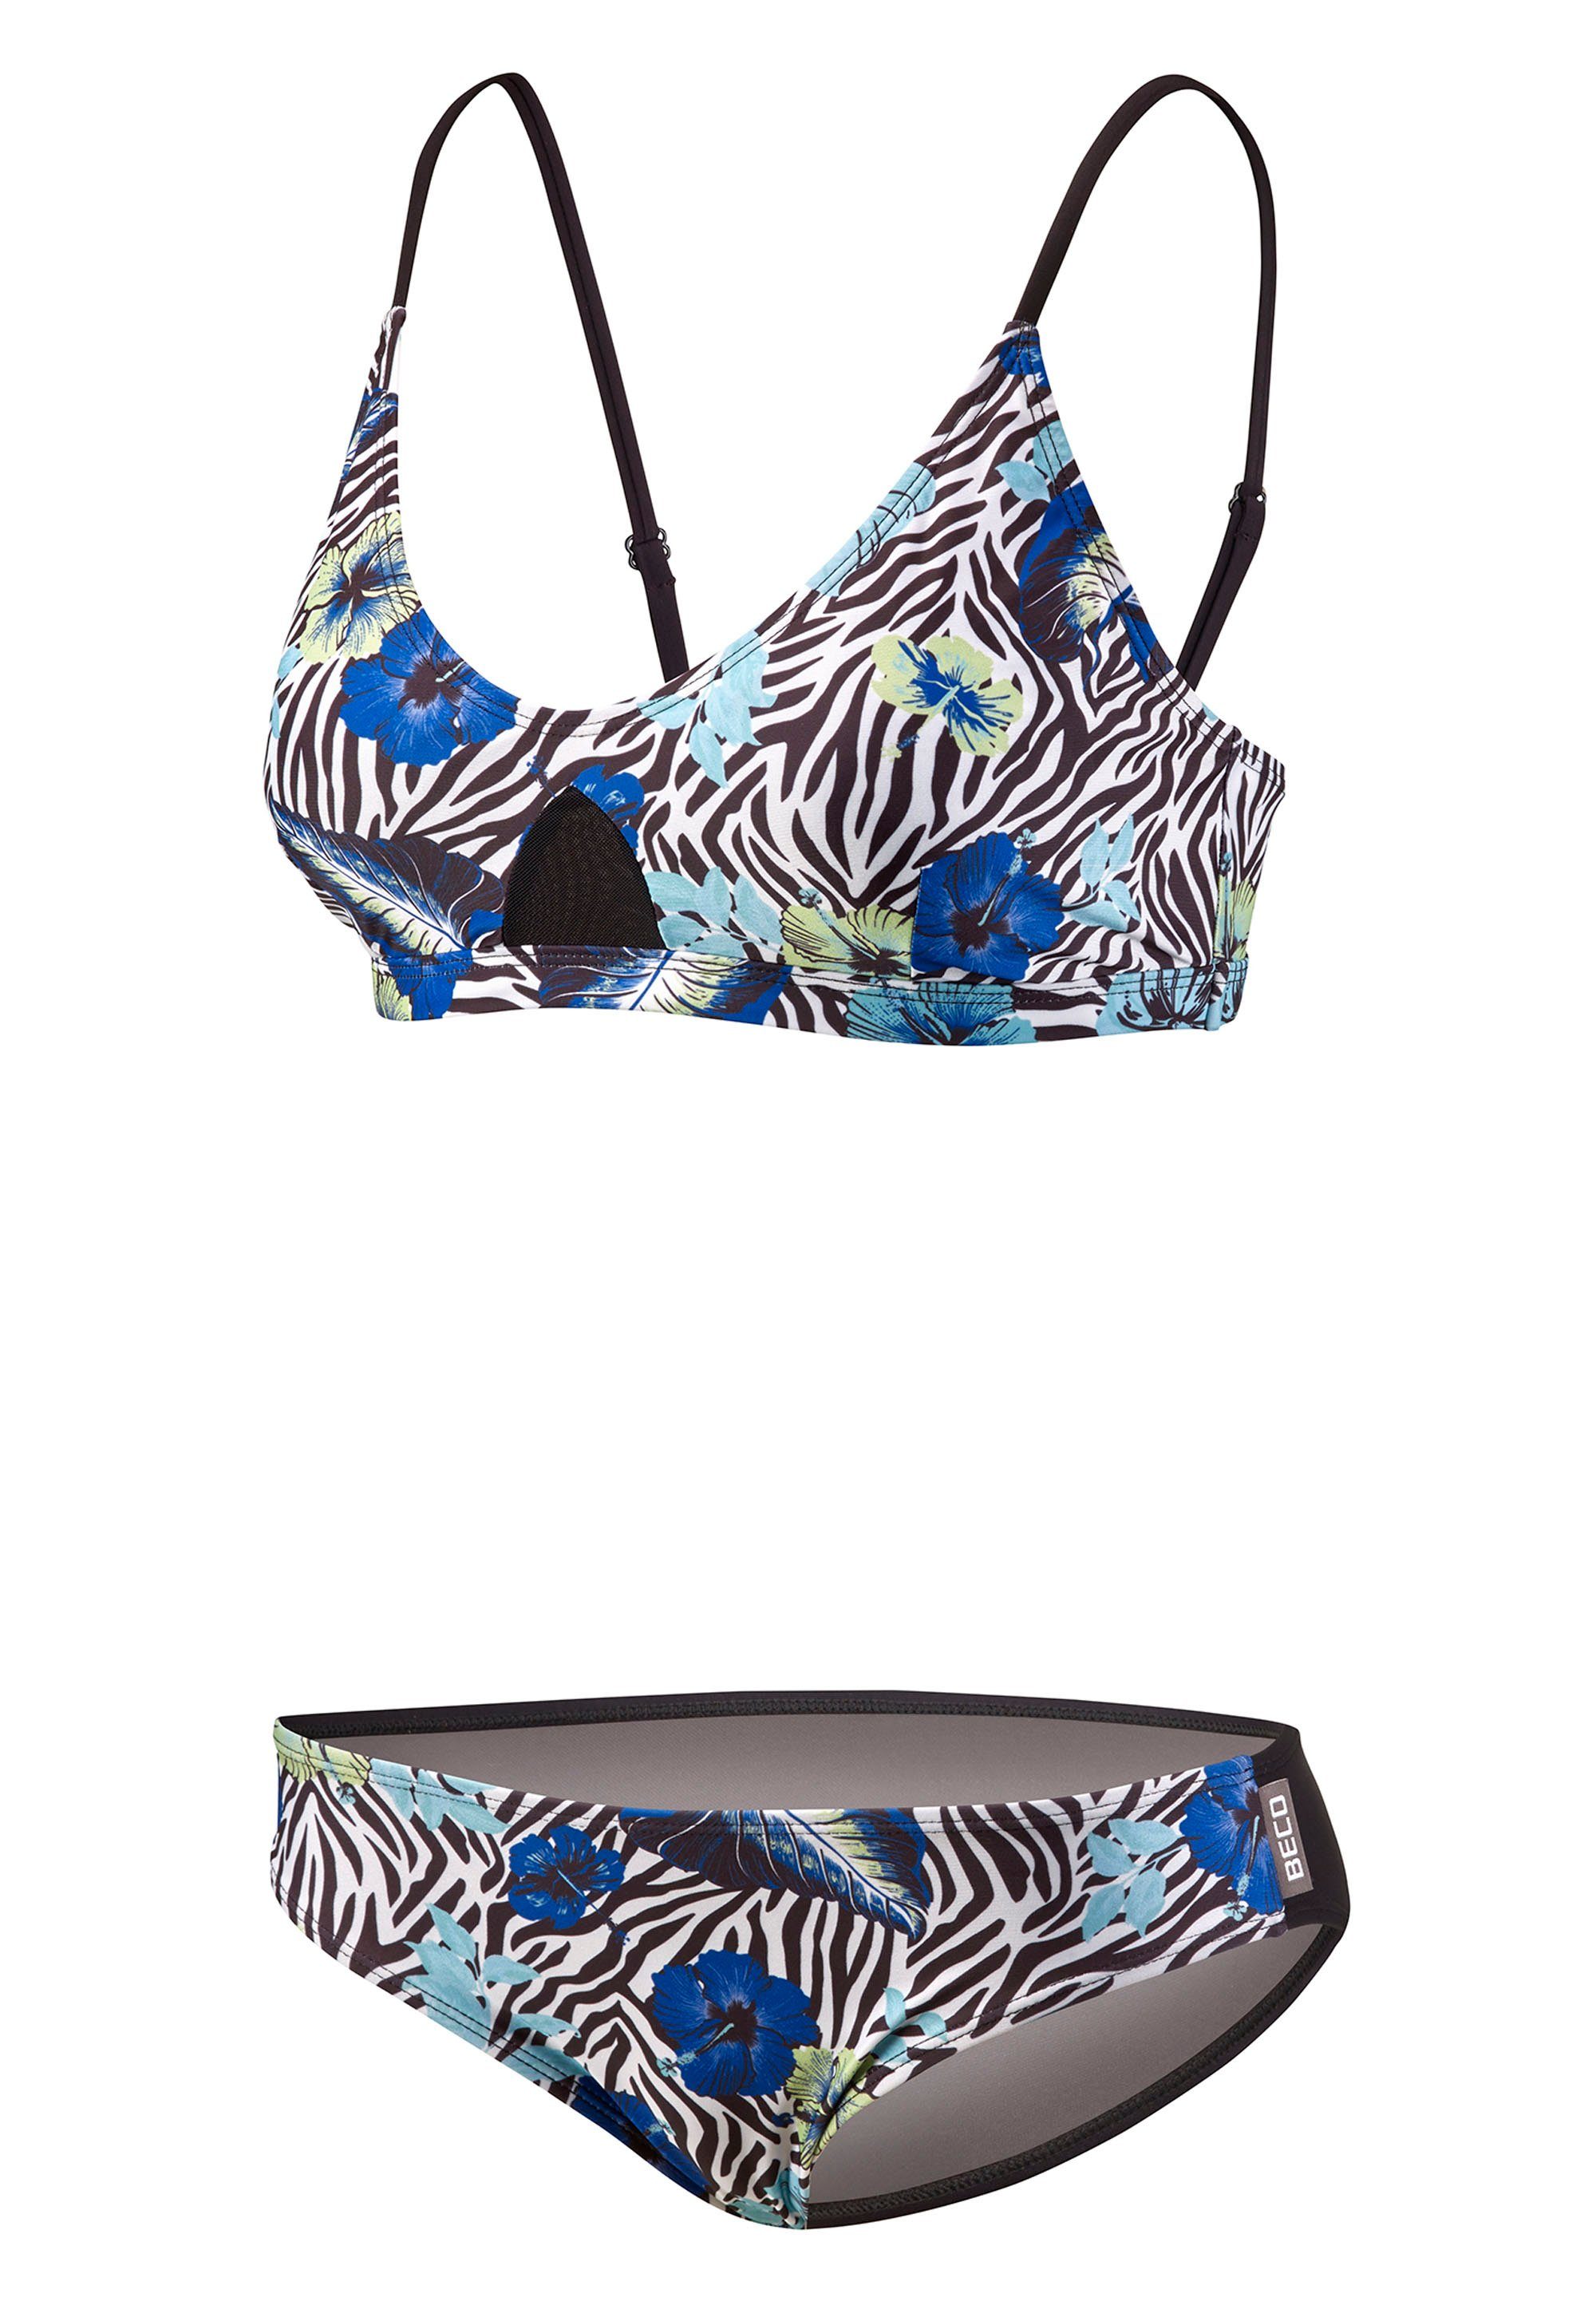 Beco Beermann Balconette-Bikini BECO-Lady-Collection (2-St) Design in floralem